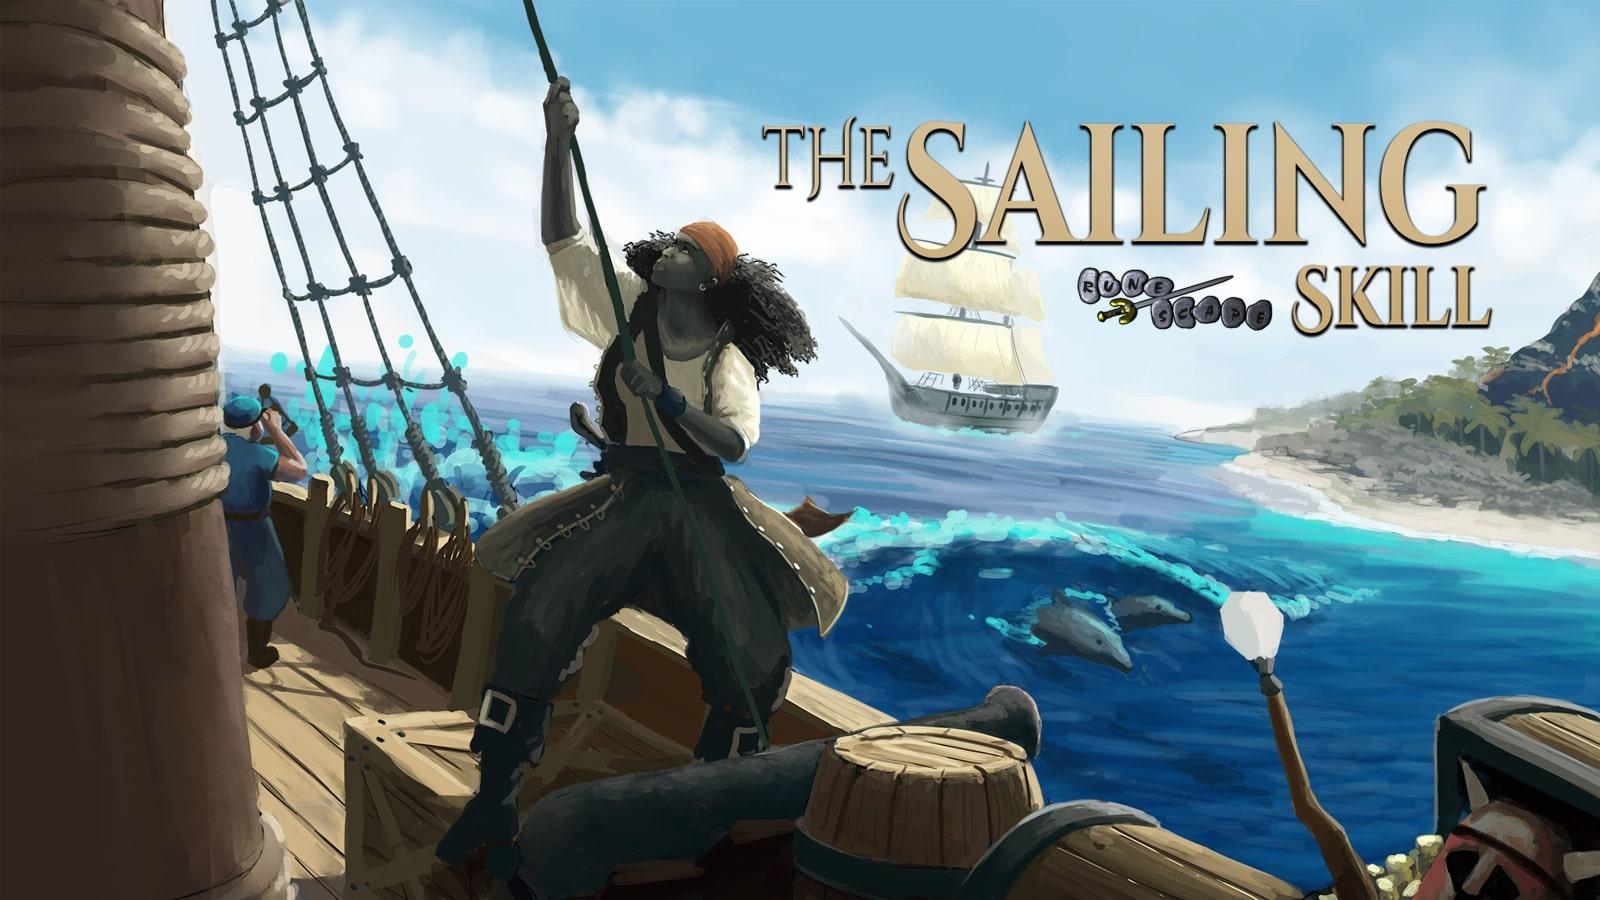 A character works the sails on the high sea